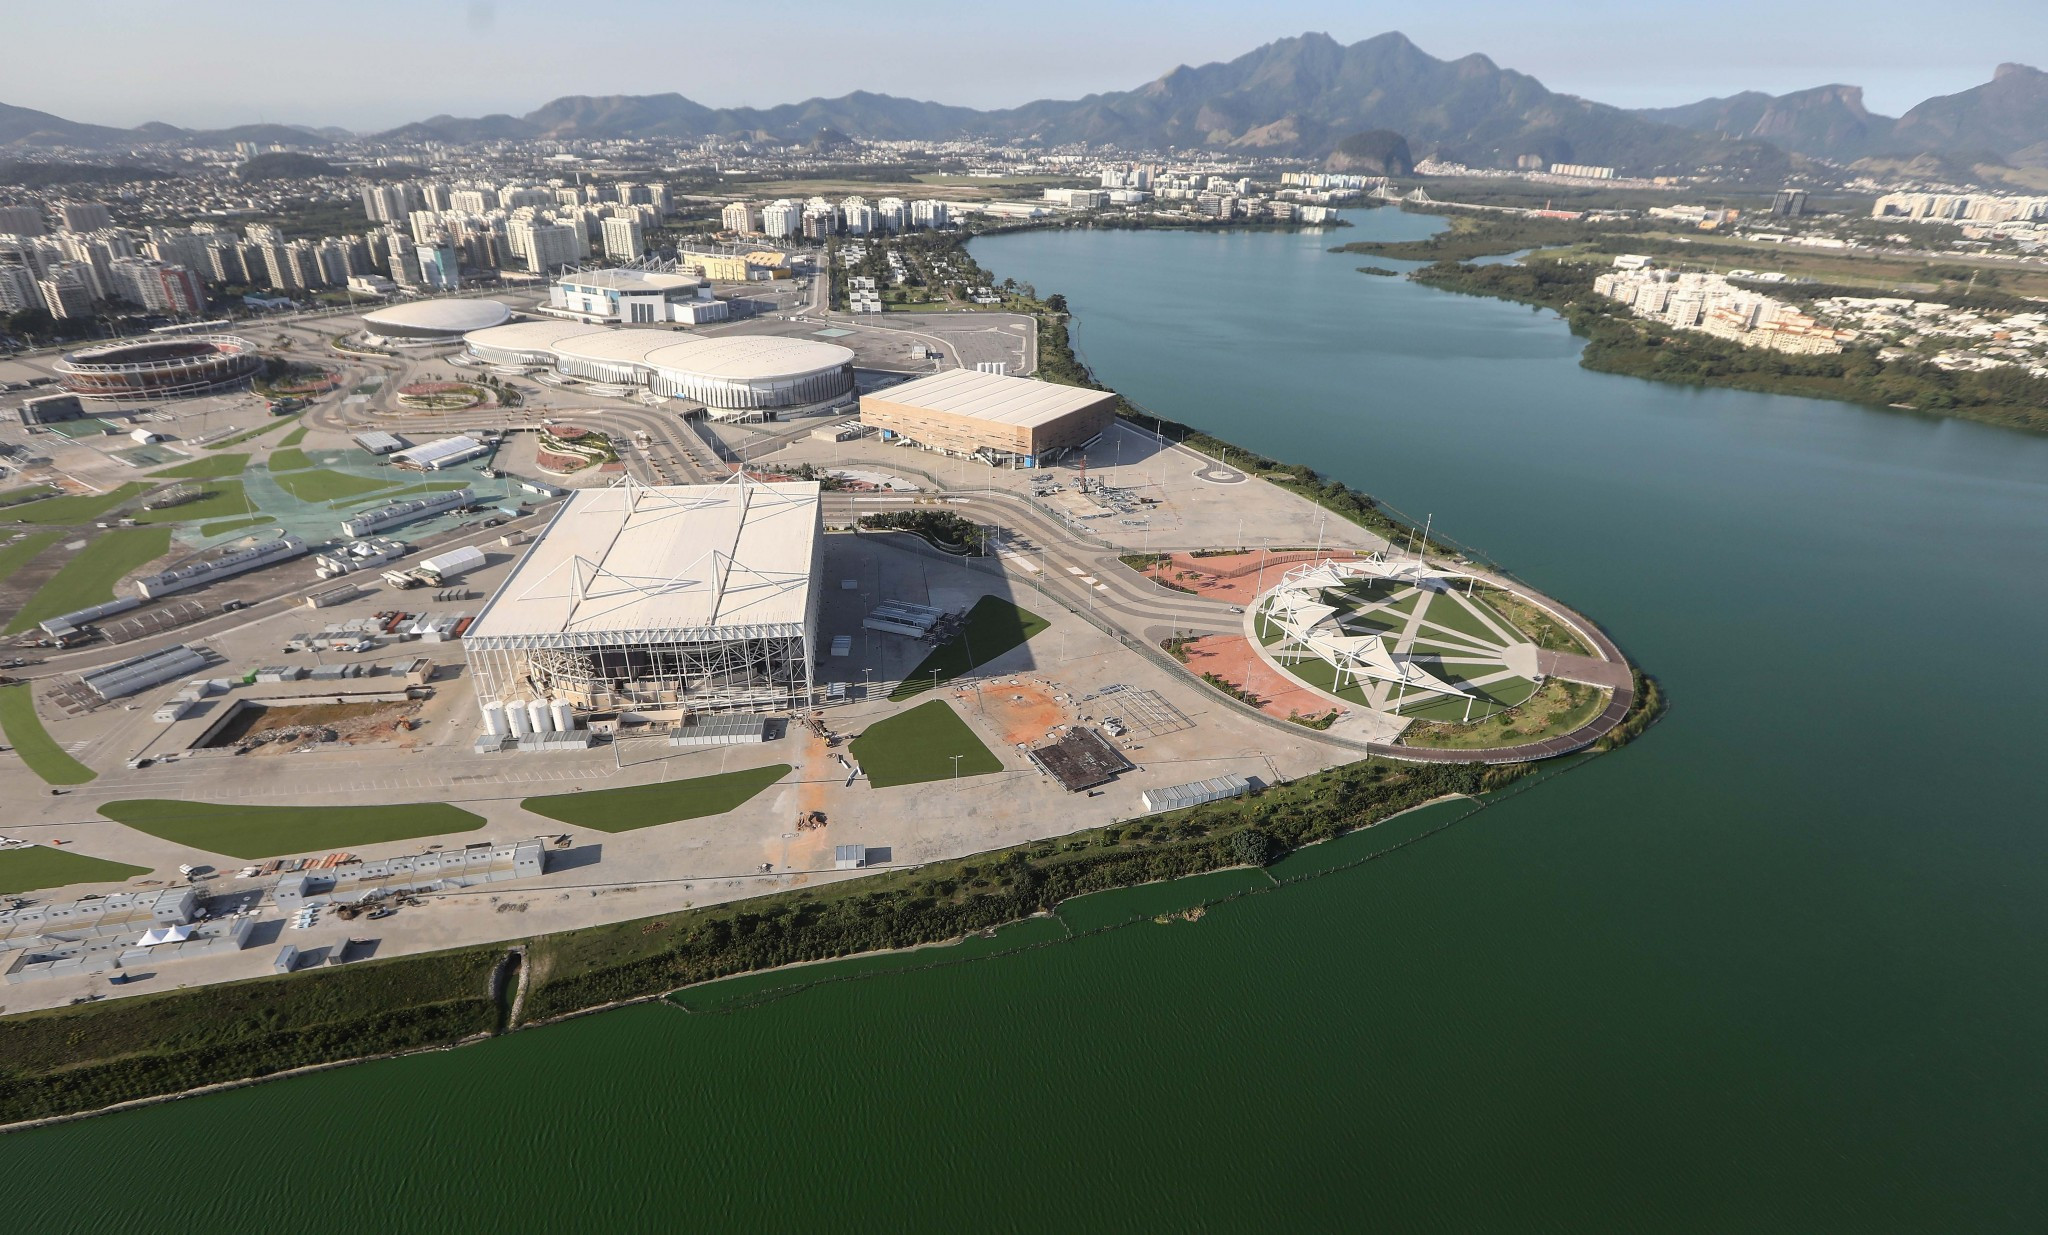 The legacy of Rio 2016, including the post-Games use of venues at the Olympic Park in Barra de Tijuca, has repeatedly come under question ©Getty Images